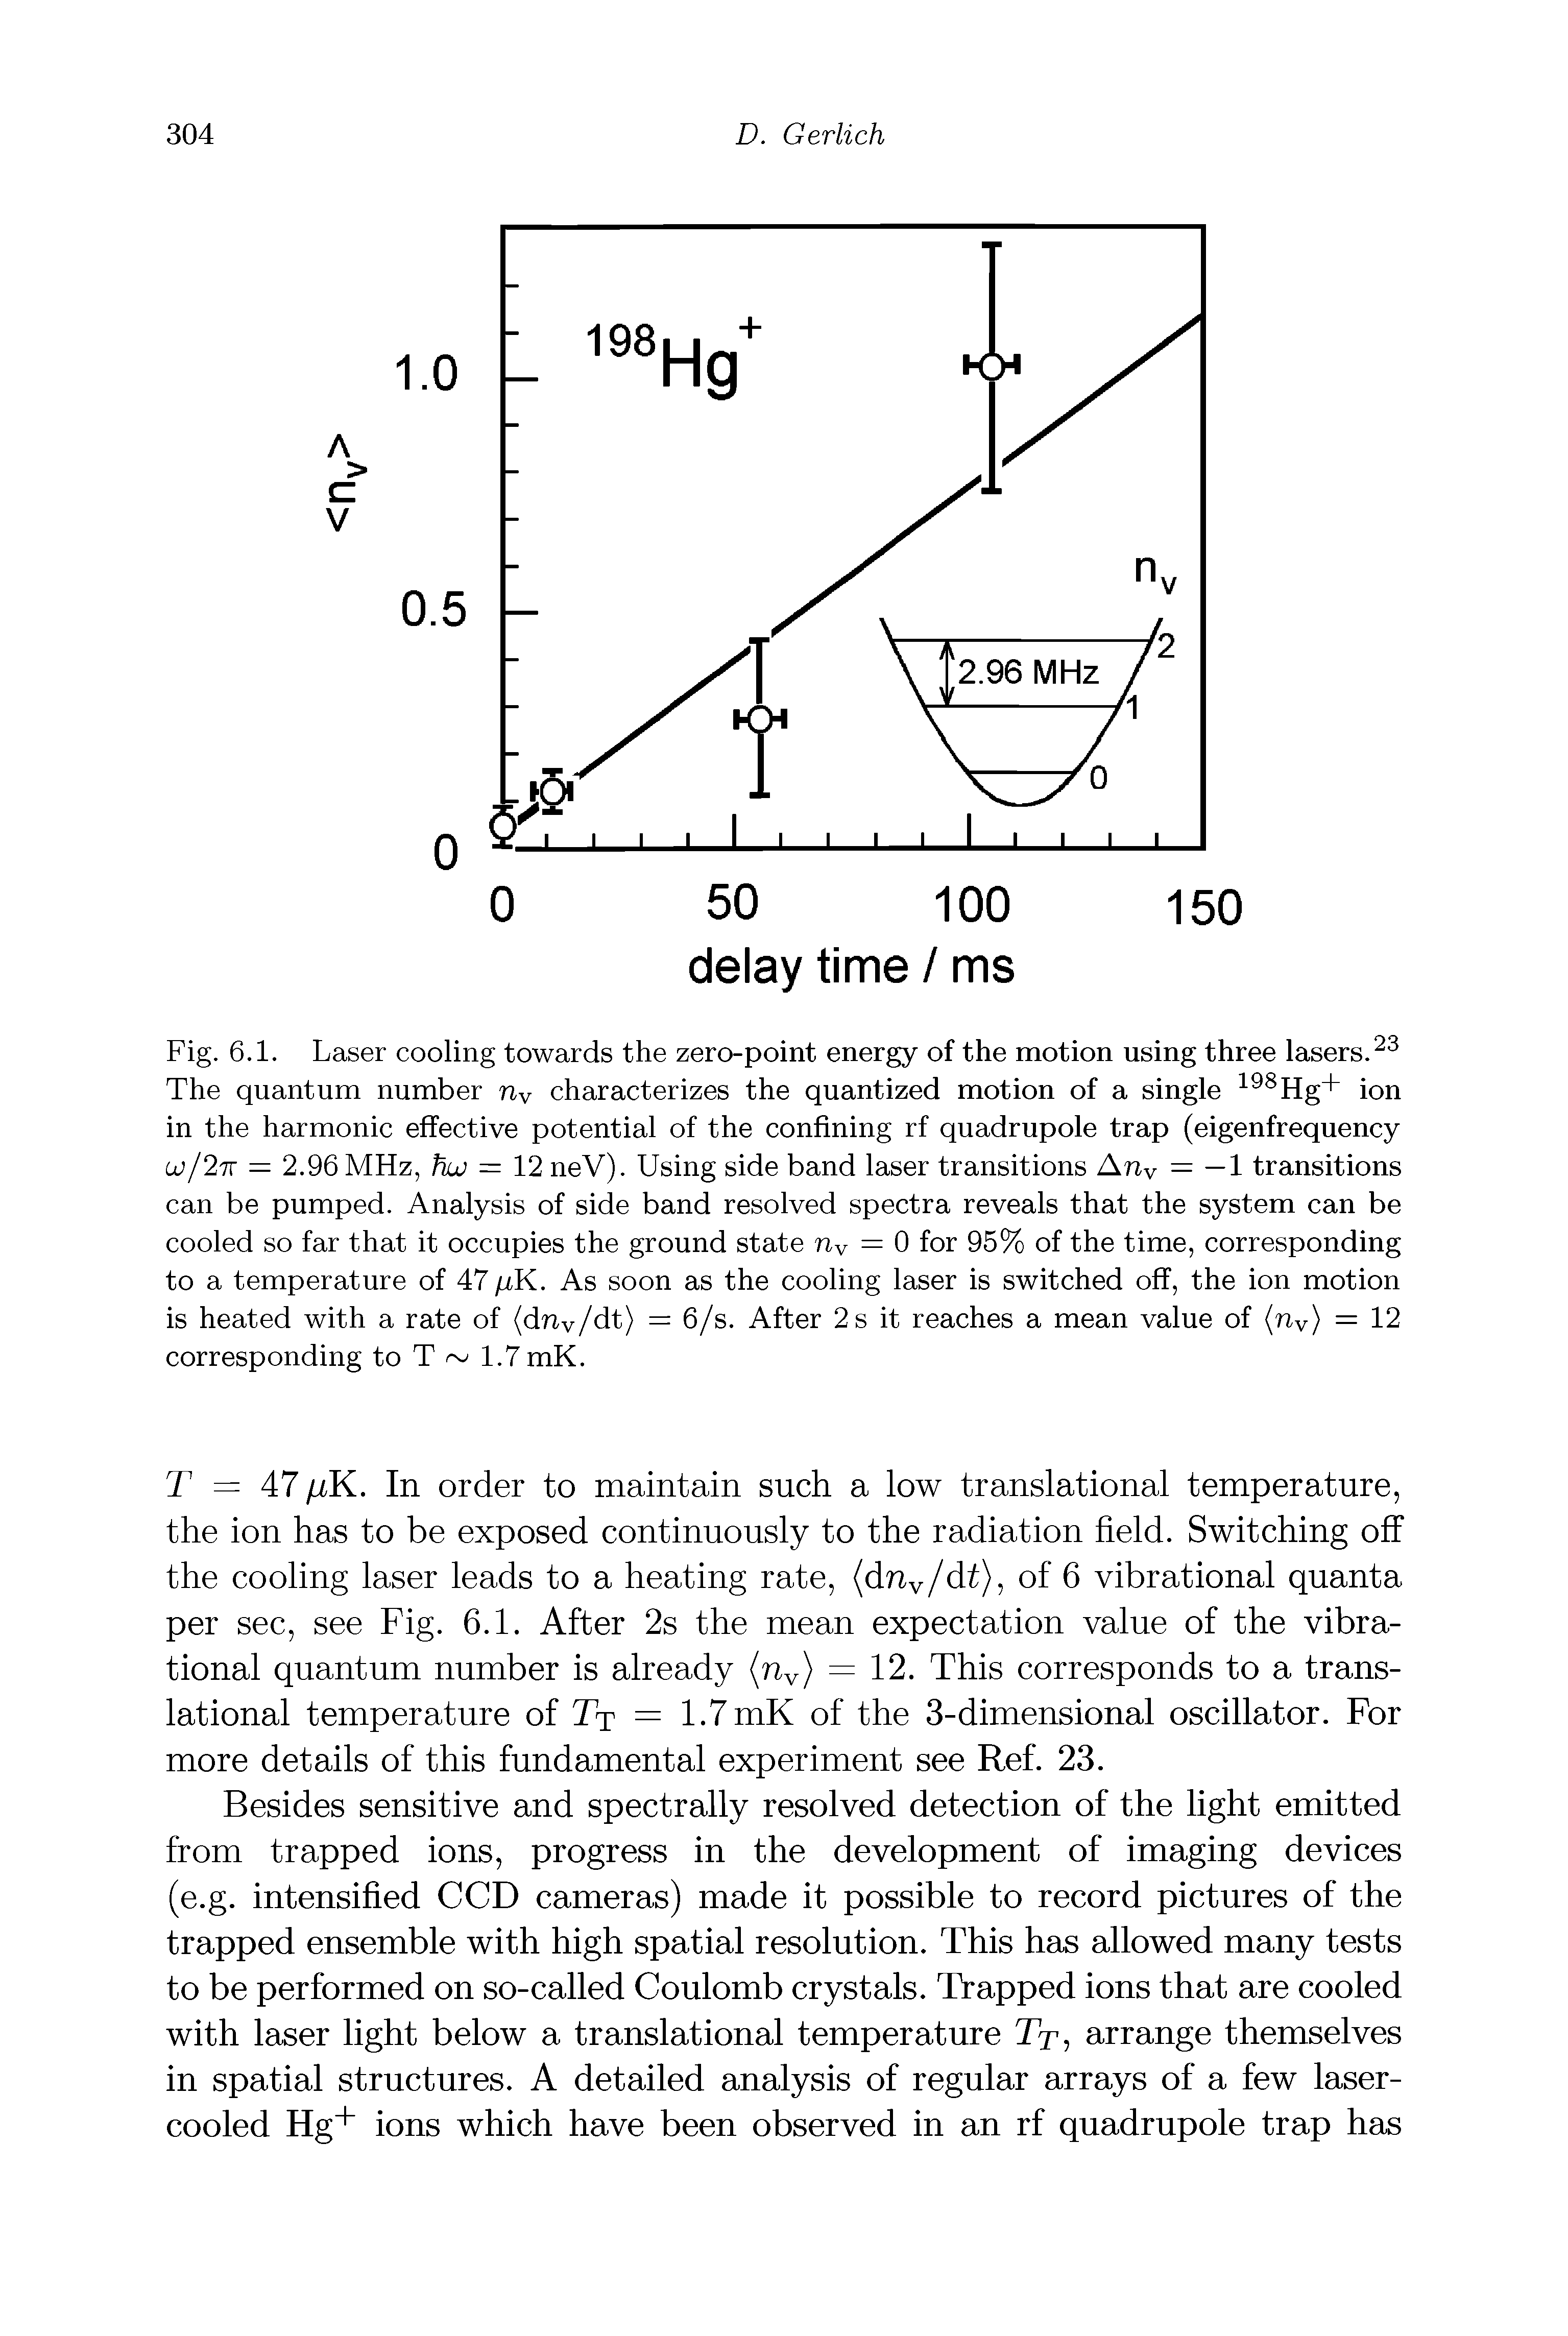 Fig. 6.1. Laser cooling towards the zero-point energy of the motion using three lasers. The quantum number riy characterizes the quantized motion of a single Hg+ ion in the harmonic effective potential of the confining rf quadrupole trap (eigenfrequency jjjl K — 2.96 MHz, huj = 12 neV). Using side band laser transitions Any = —1 transitions can be pumped. Analysis of side band resolved spectra reveals that the system can be cooled so far that it occupies the ground state ny = 0 for 95% of the time, corresponding to a temperature of 47 fiK. As soon as the cooling laser is switched off, the ion motion is heated with a rate of (dny/dt) = 6/s. After 2 s it reaches a mean value of (riy) = 12 corresponding to T 1.7 mK.